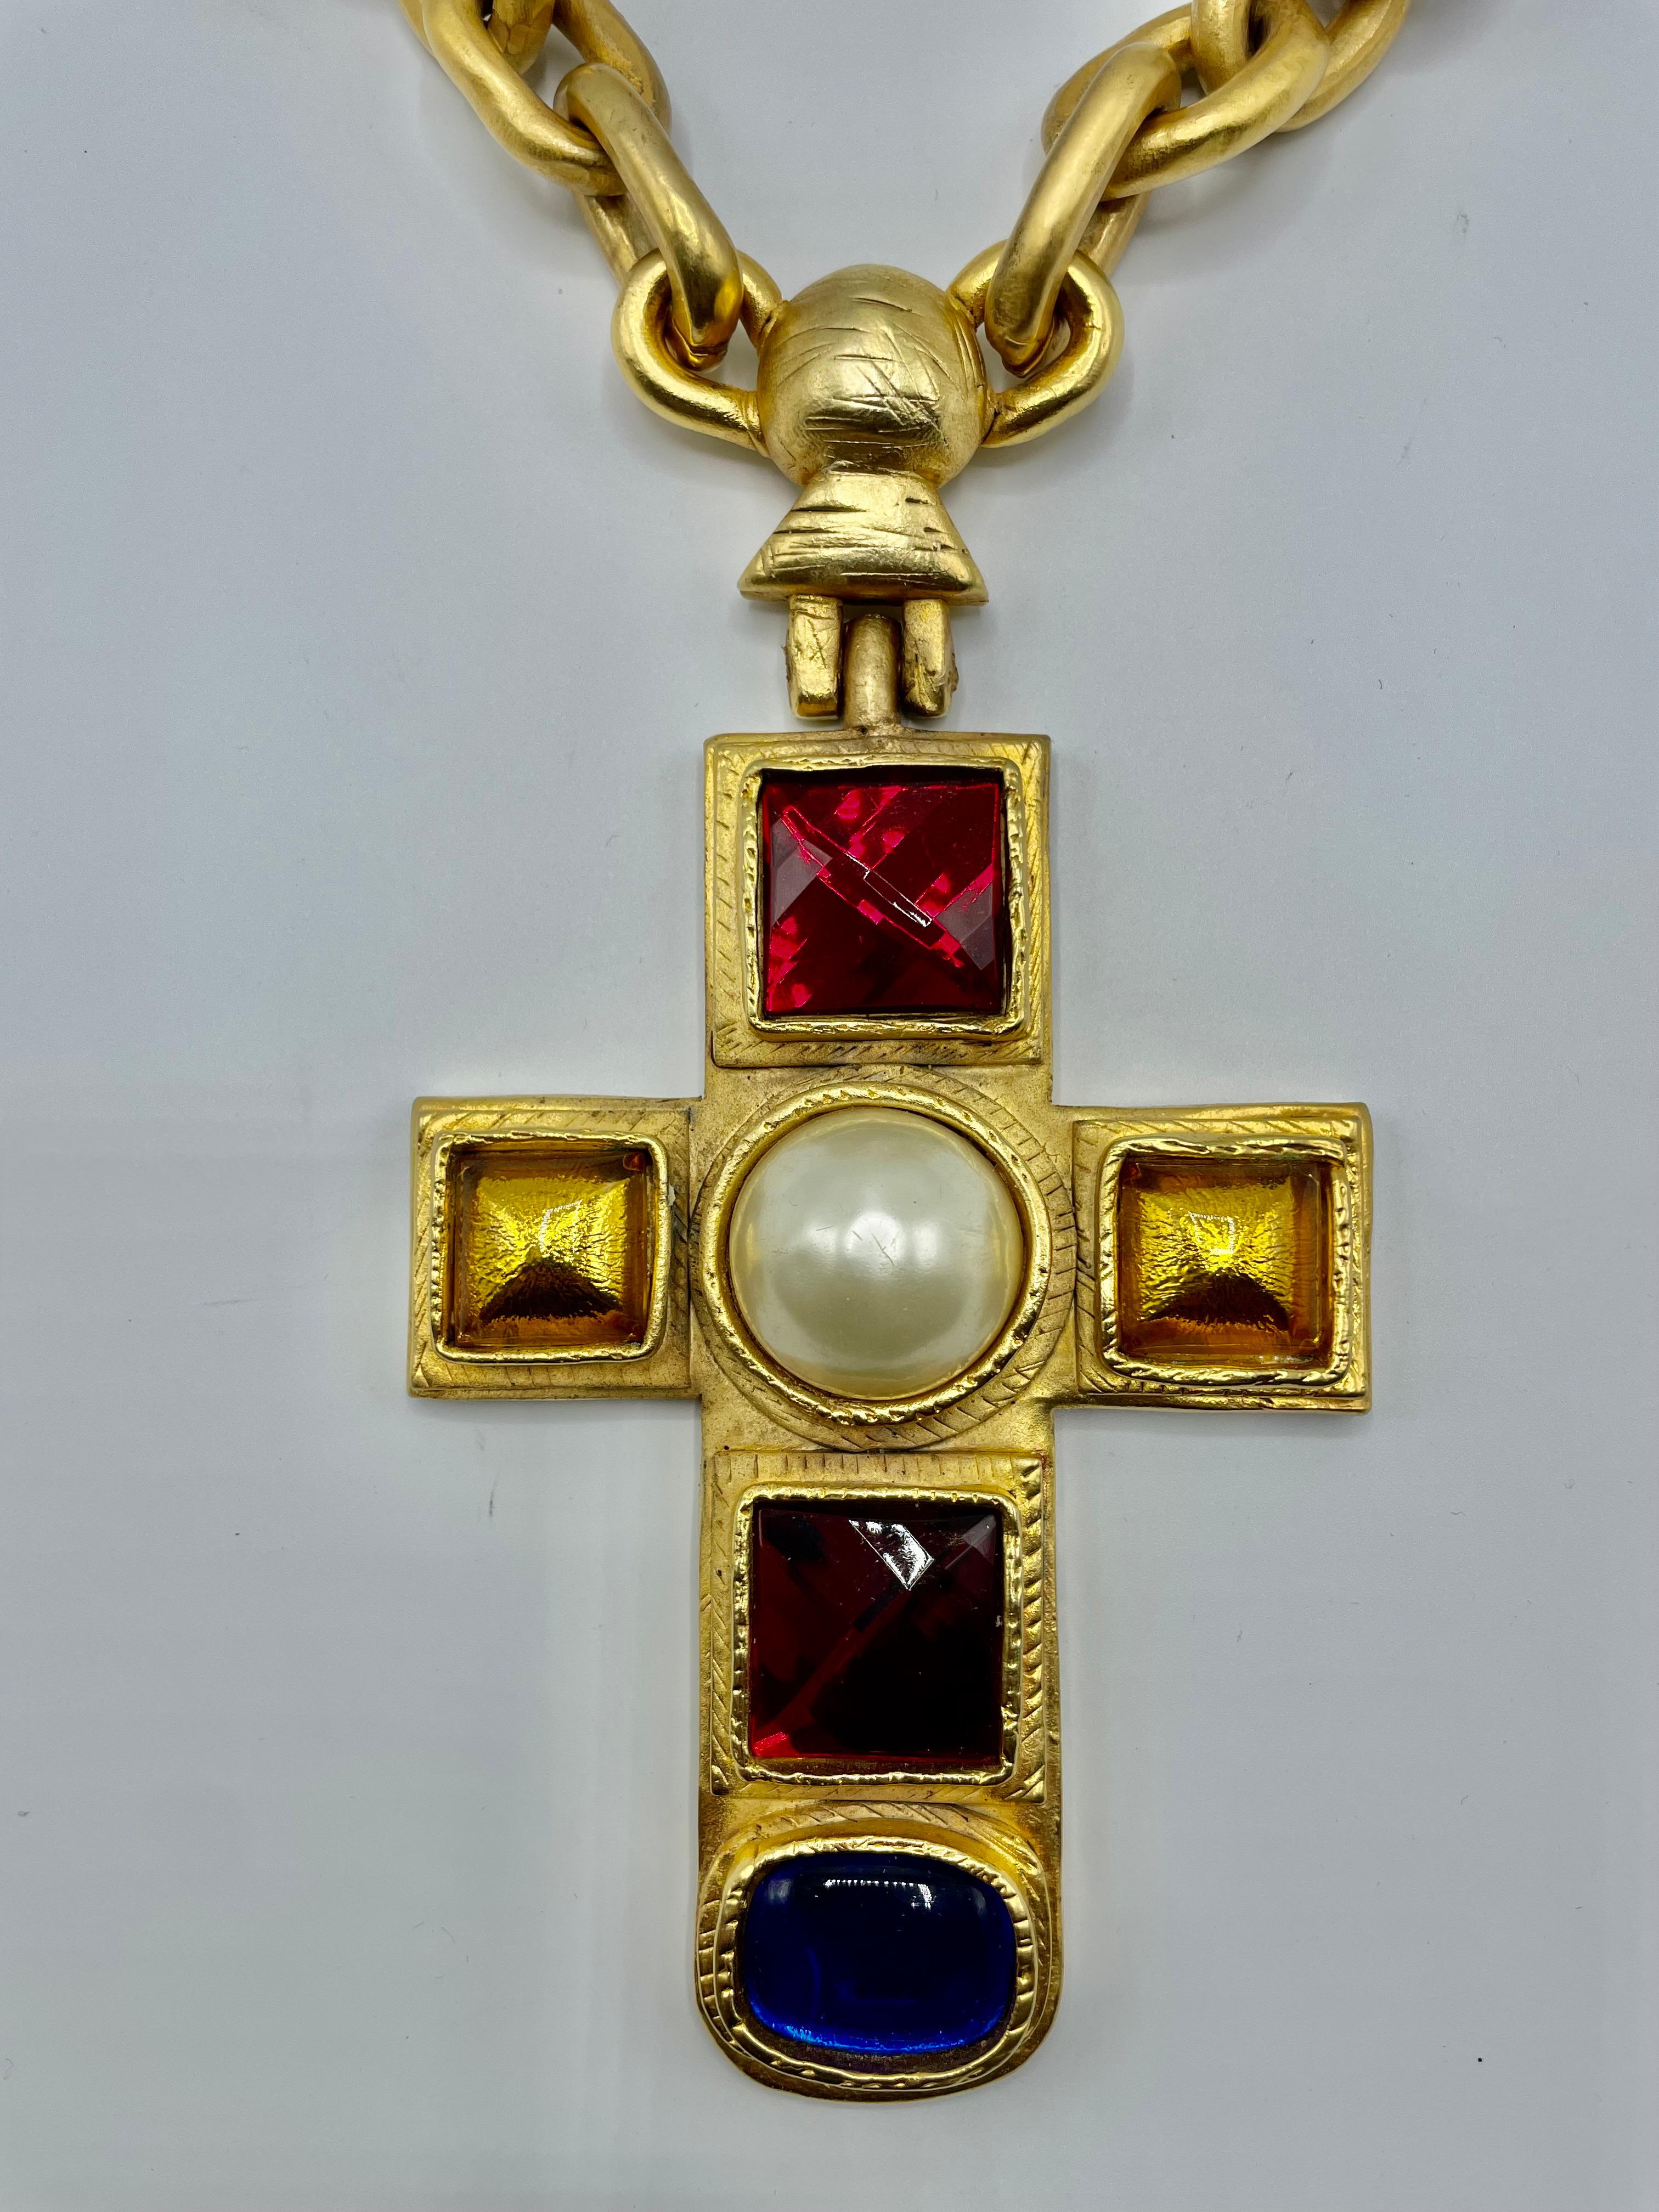 Massive cross and necklace design by Victoire de Castellane, Unique and spectacular. A must have collectible.